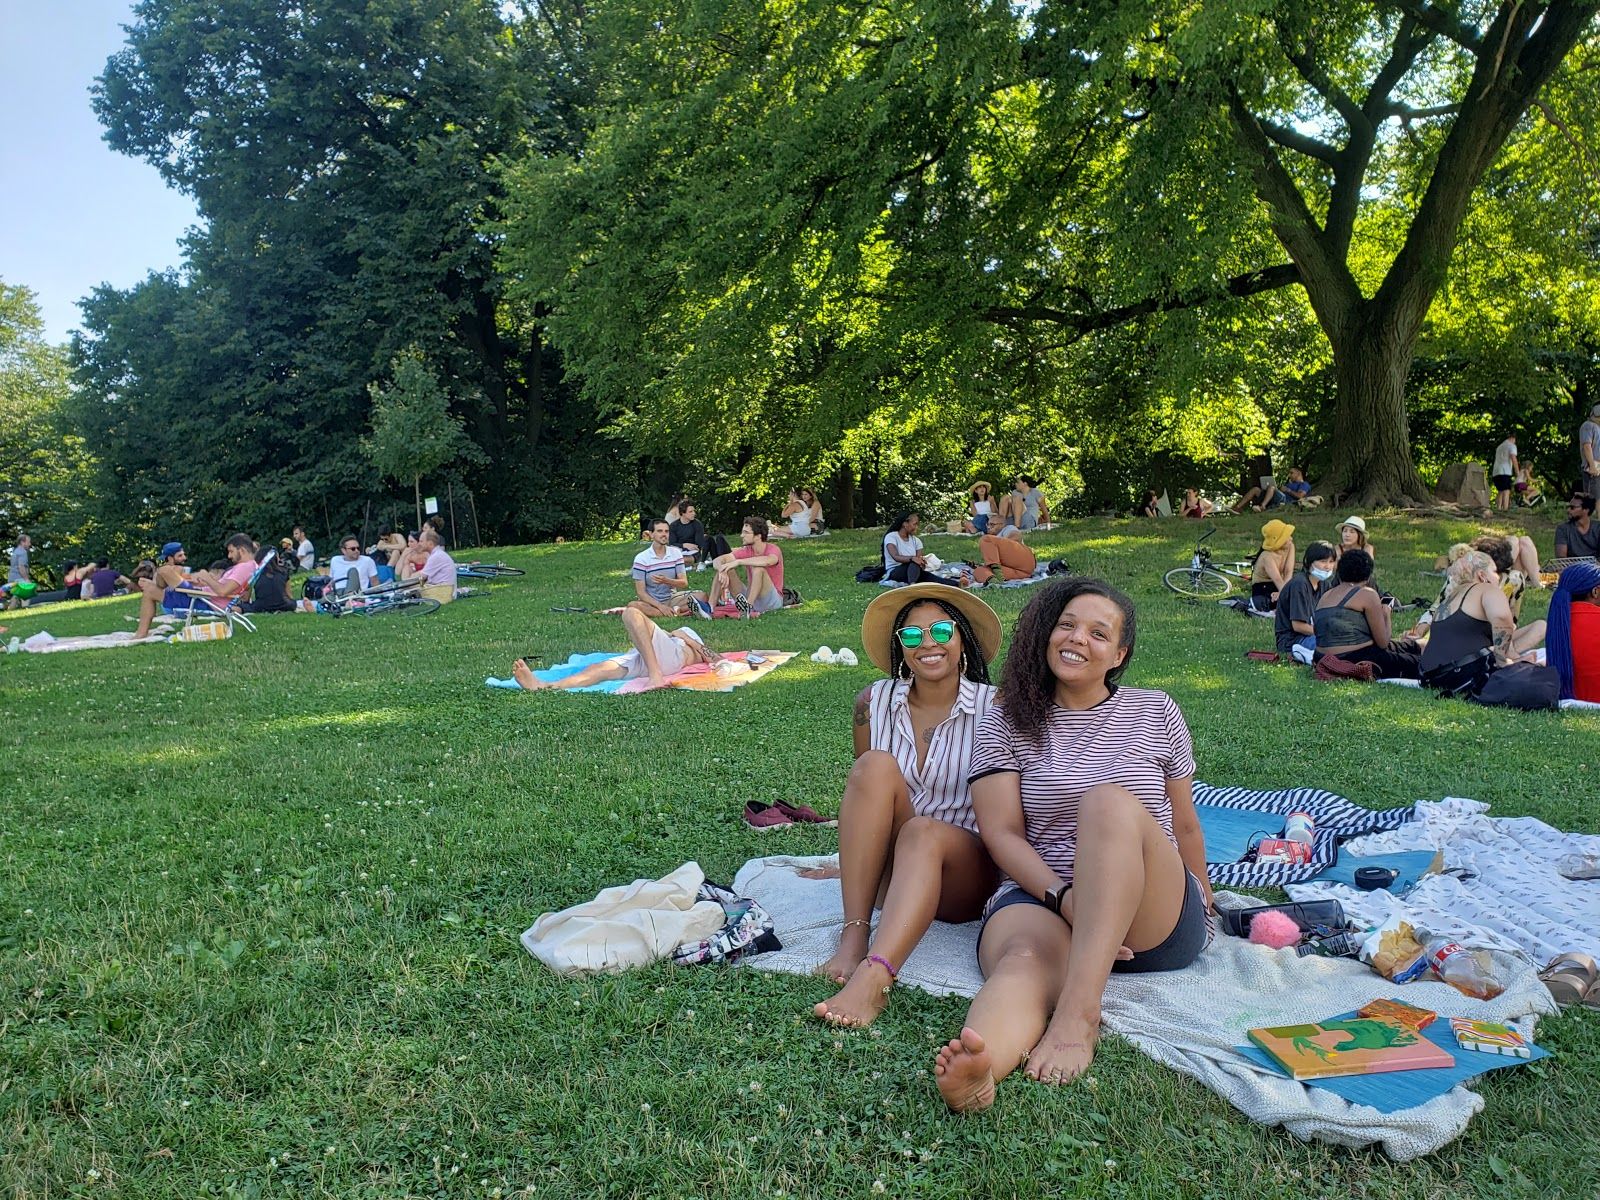 Brooklyn residents Taina and Cherise in Prospect Park. Image by Clarisa Diaz. United States, 2020.
